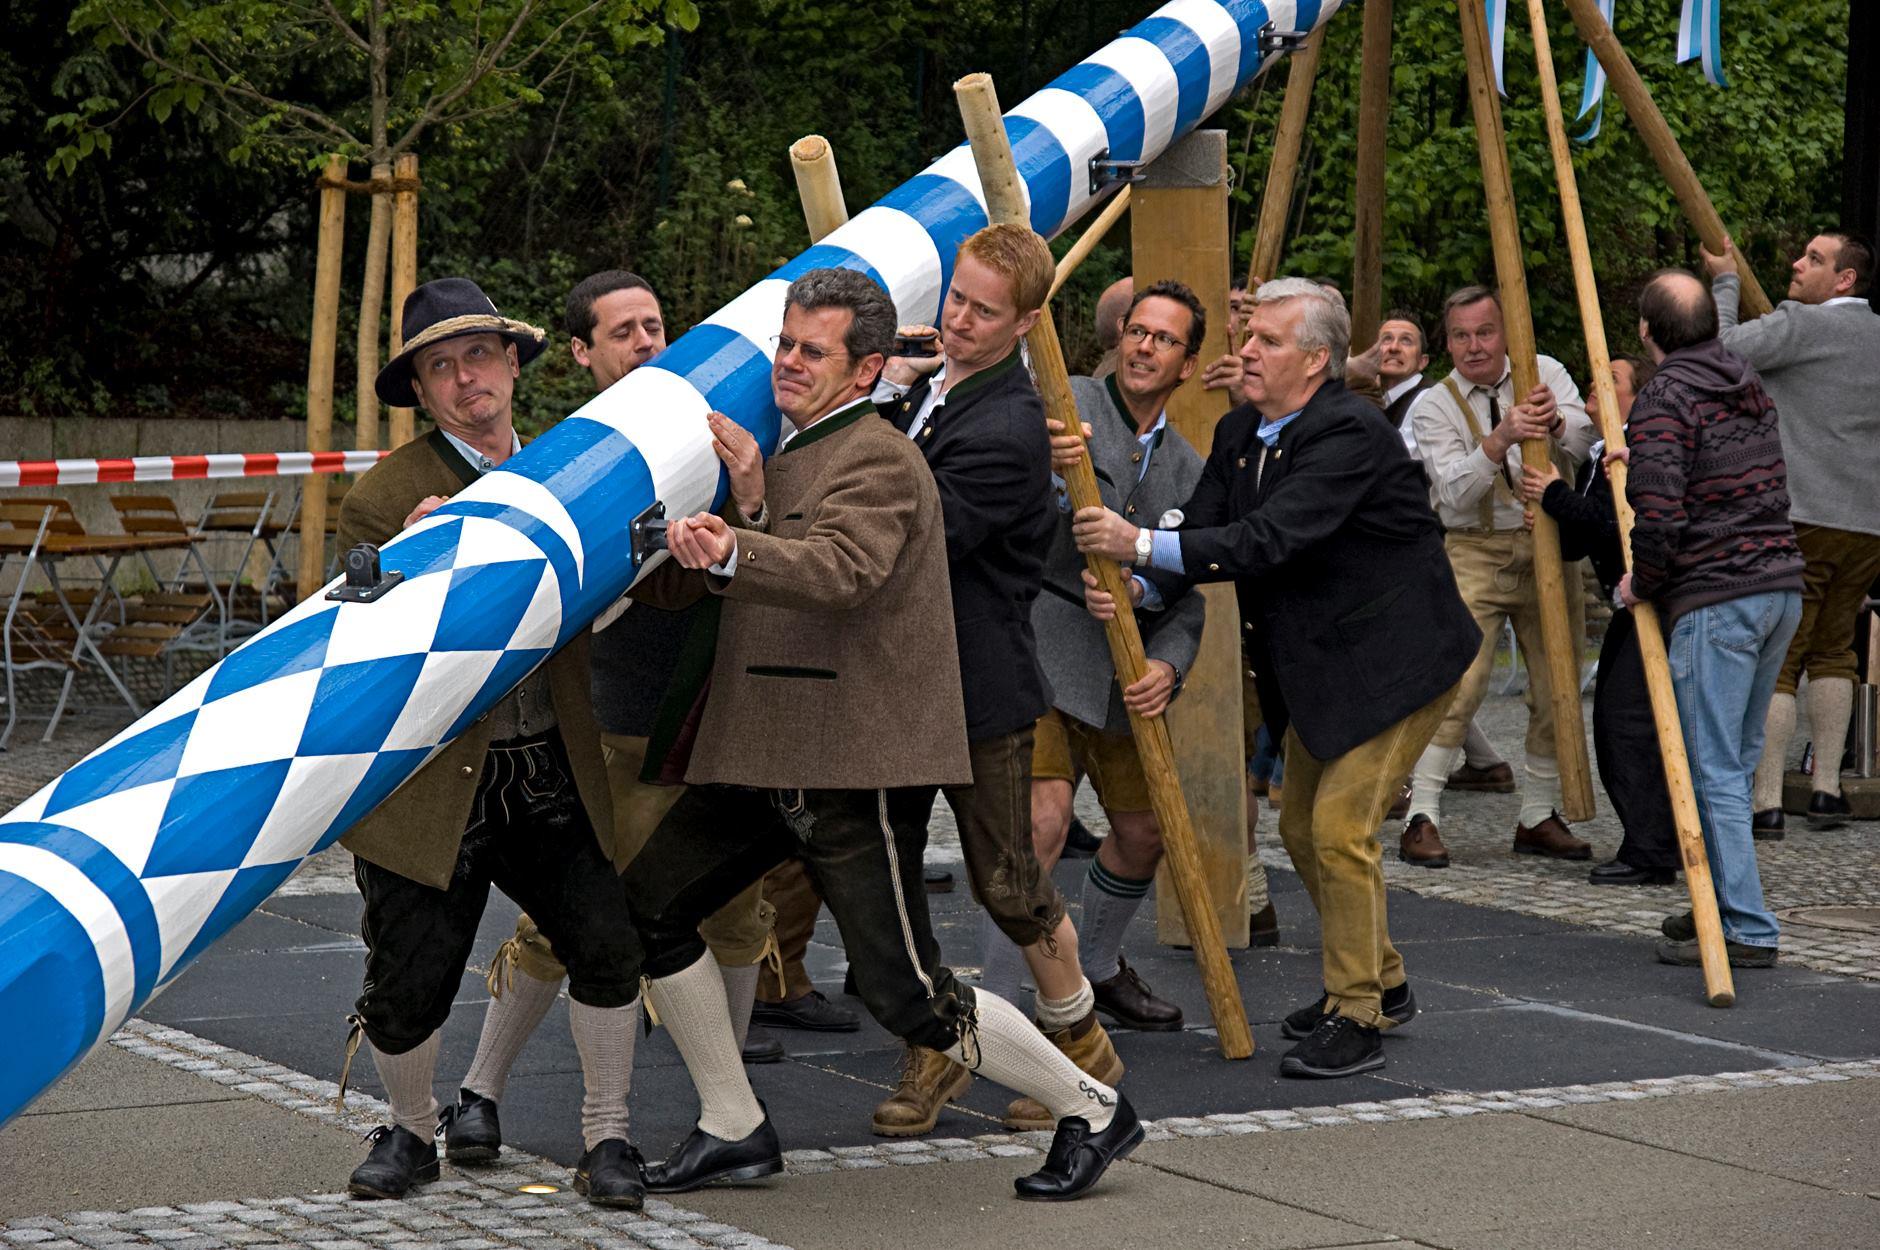 A Maibaum, or maypole, is part of the traditional German festival marking the start of spring. (Courtesy of Hofbräuhaus Chicago)